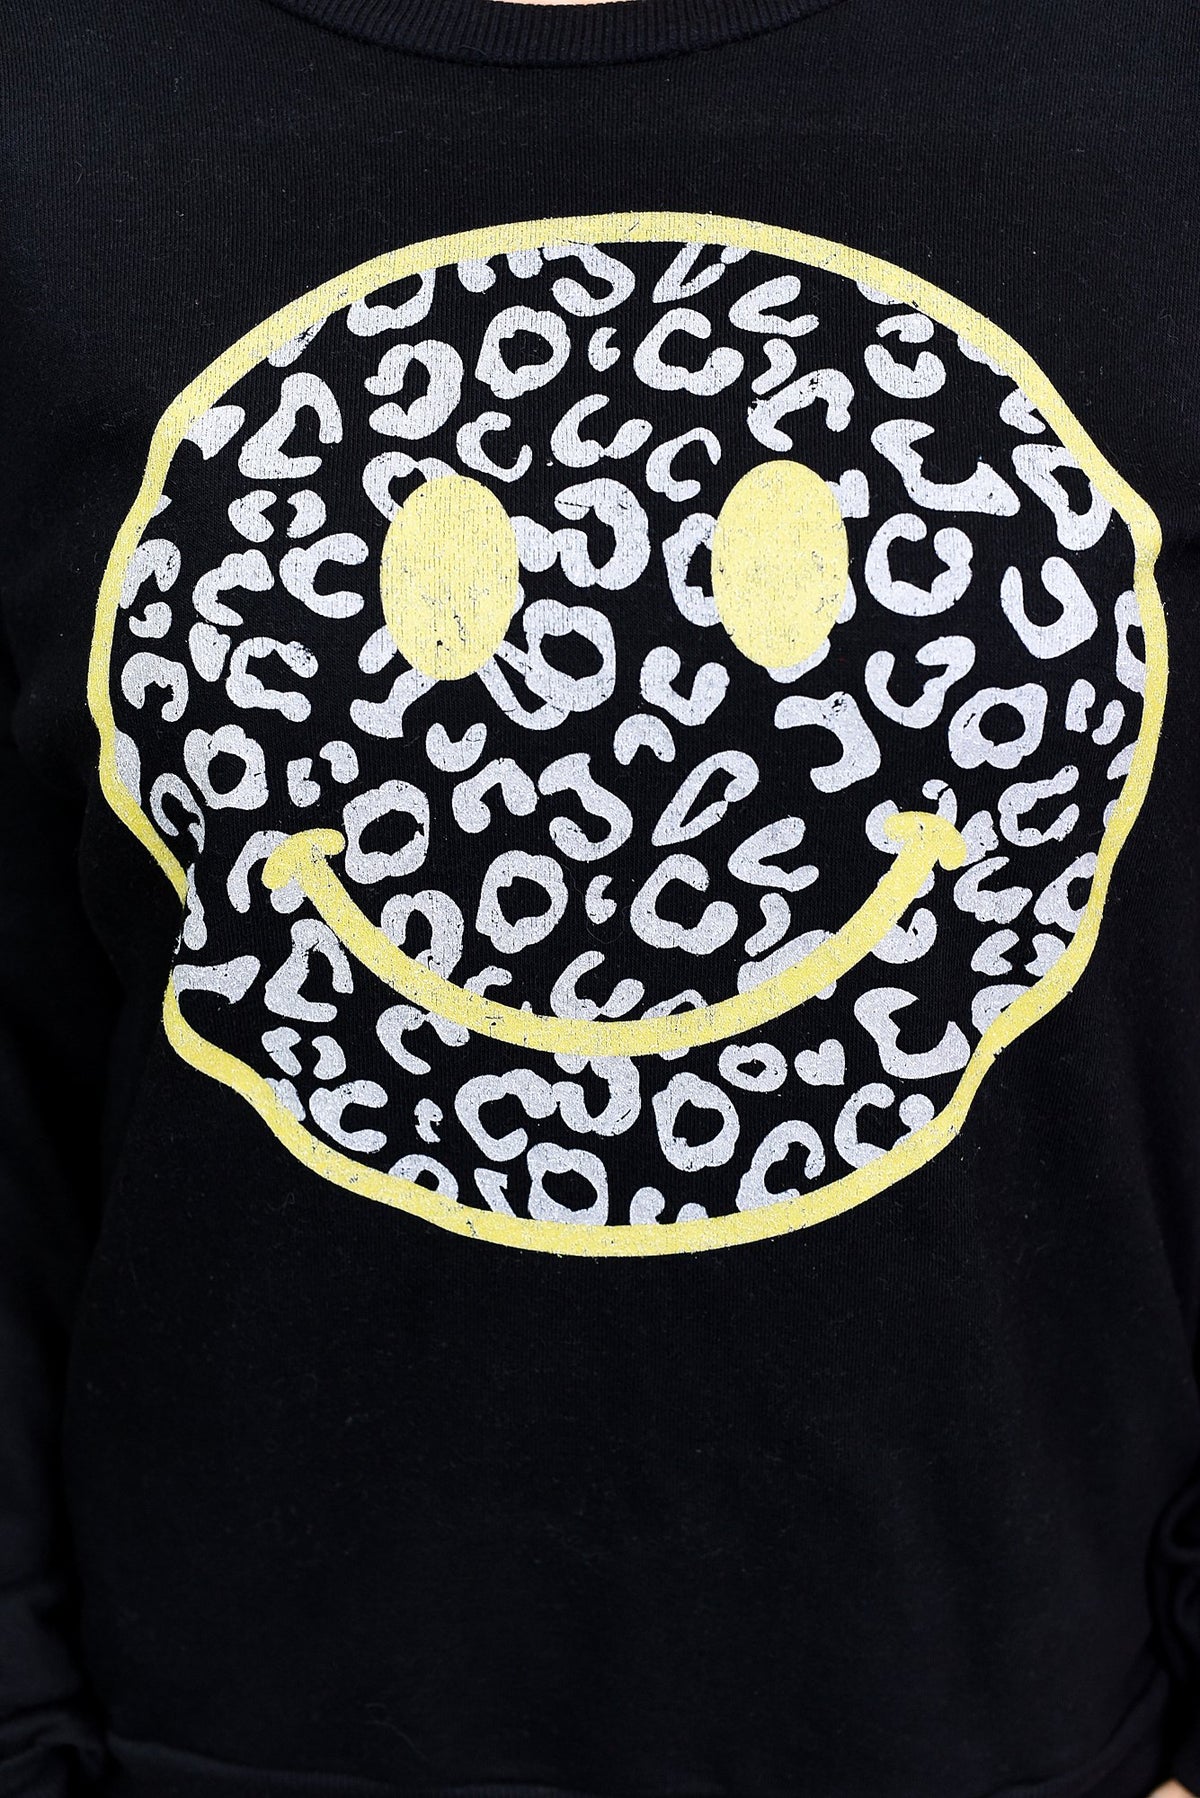 Always Stay Smiling Black Leopard/Smiley Face Printed Graphic Sweater - A1550BK